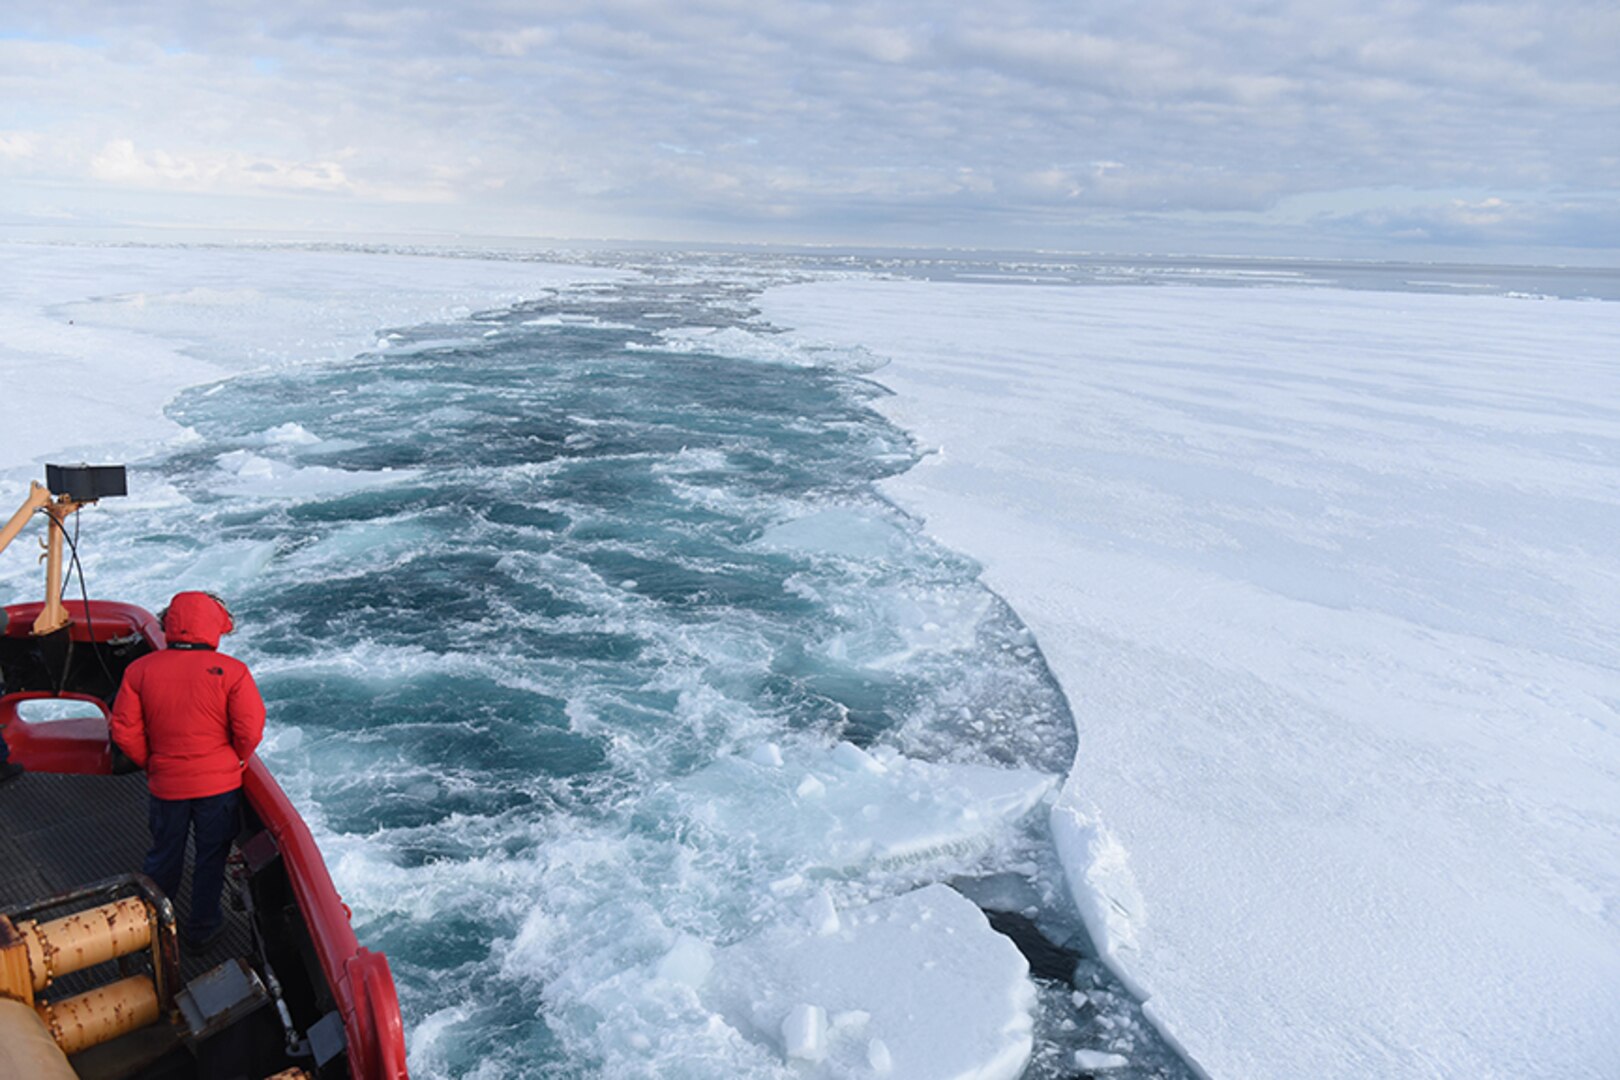 The Coast Guard Cutter Polar Star cuts a channel into a field of fast ice in McMurdo Sound, Antarctica, Jan. 7, 2016. During Operation Deep Freeze 2016, the U.S. military's logistical support to the National Science Foundation-managed U.S. Antarctic Program, the Polar Star's mission is to create a navigable channel to McMurdo Station for several resupply vessels.